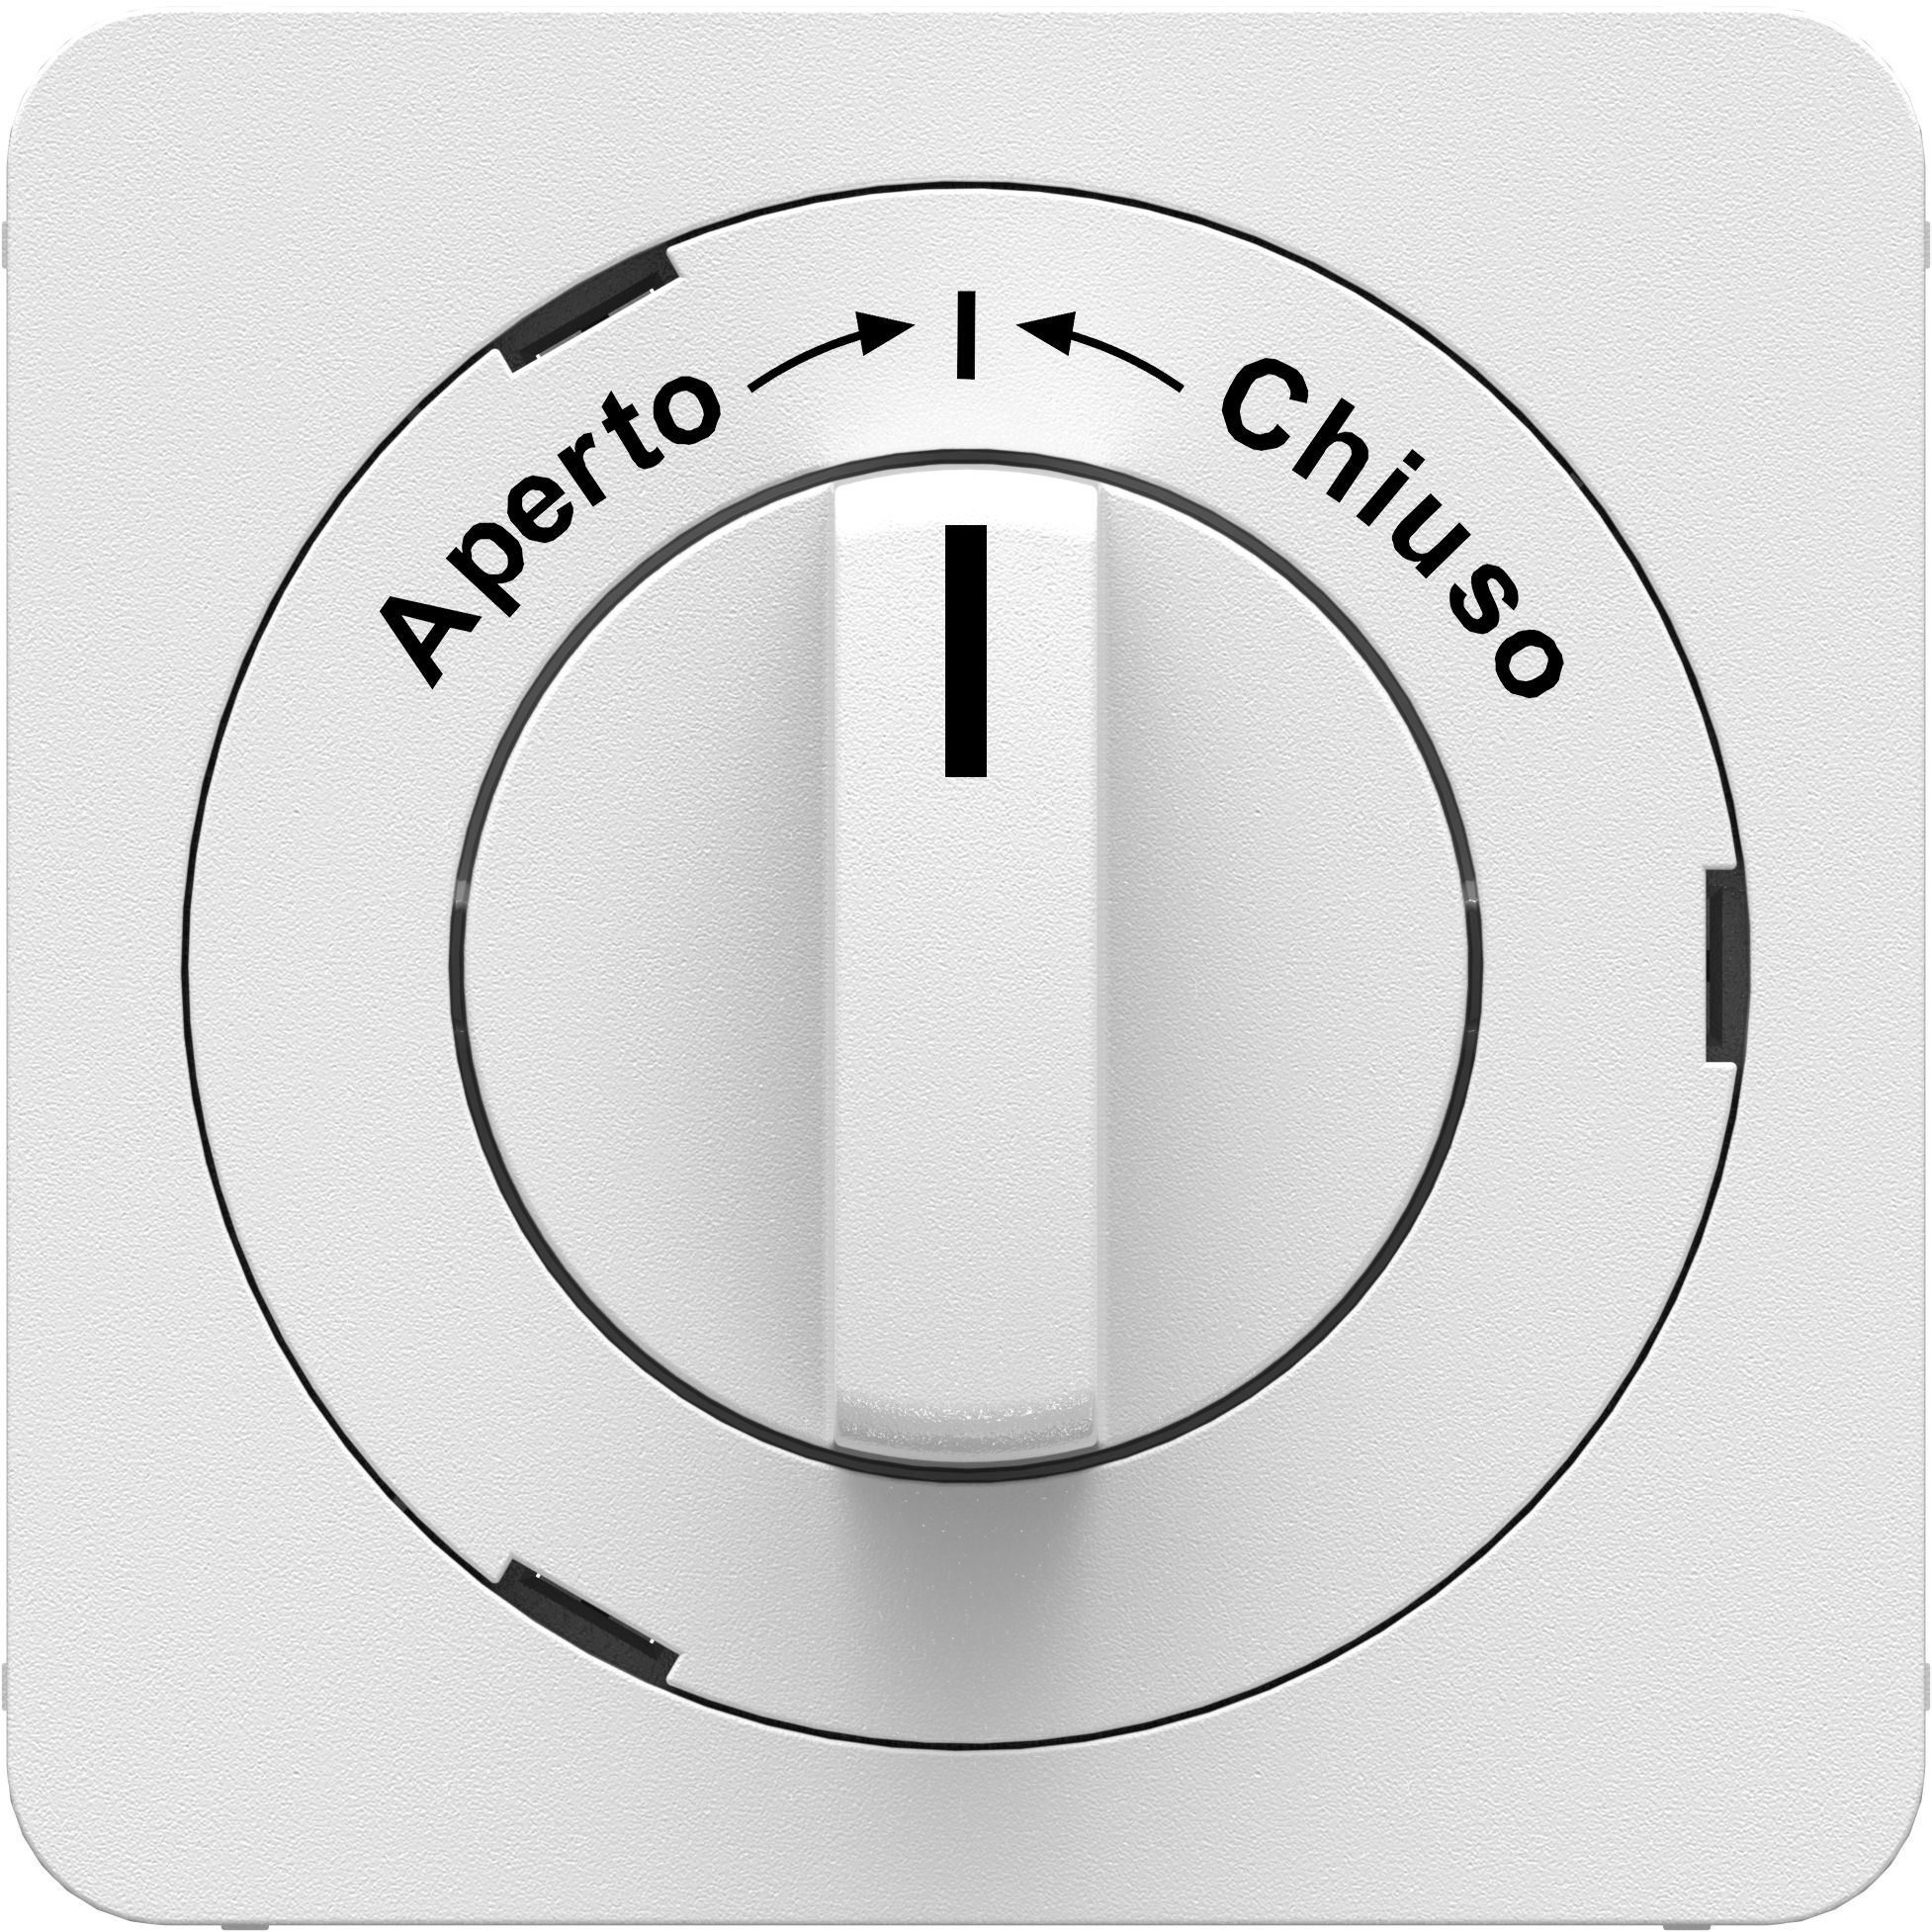 Front plates for turnable switch Aperto --> I <-- Chiuso